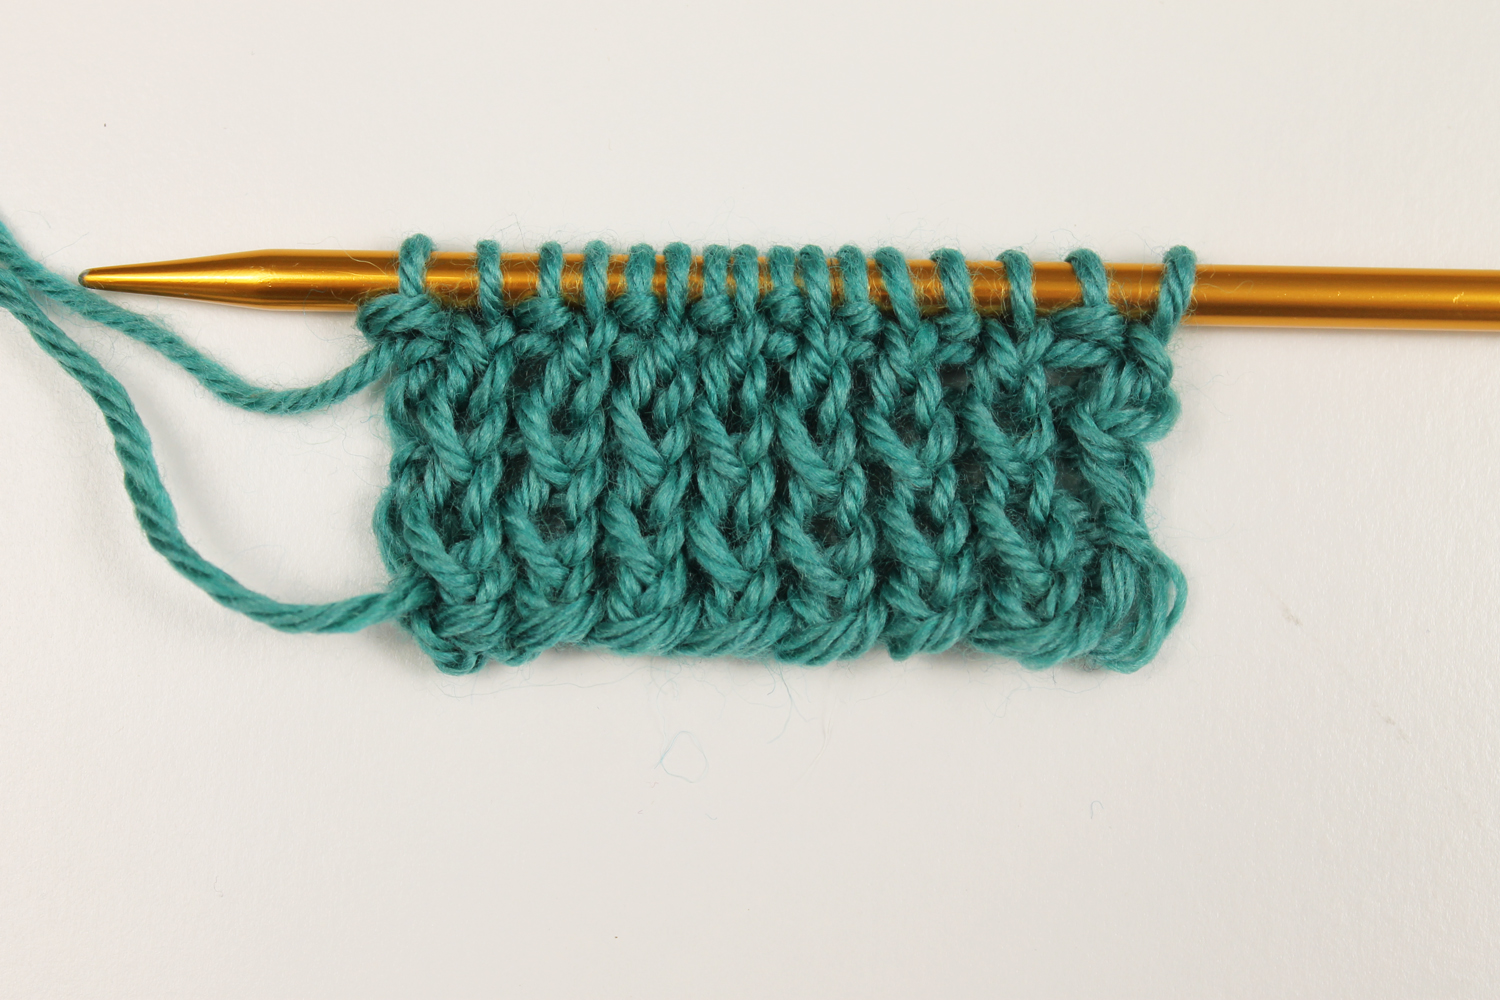 Twisted Rib Knitting Tutorial: How to Knit Twisted Ribbing | Craftsy